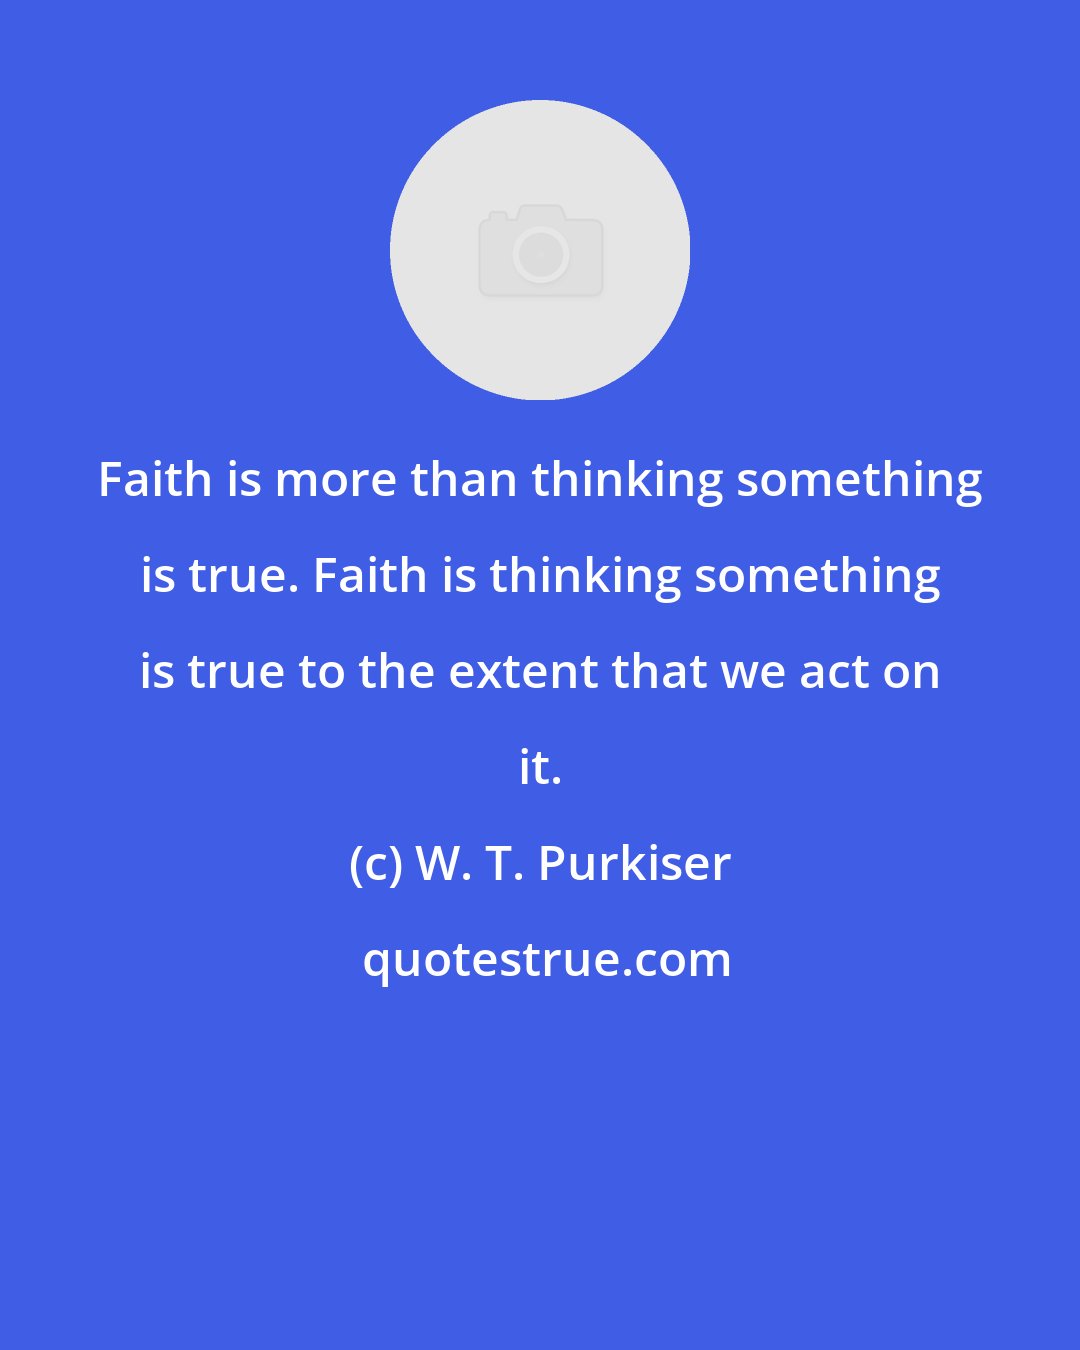 W. T. Purkiser: Faith is more than thinking something is true. Faith is thinking something is true to the extent that we act on it.